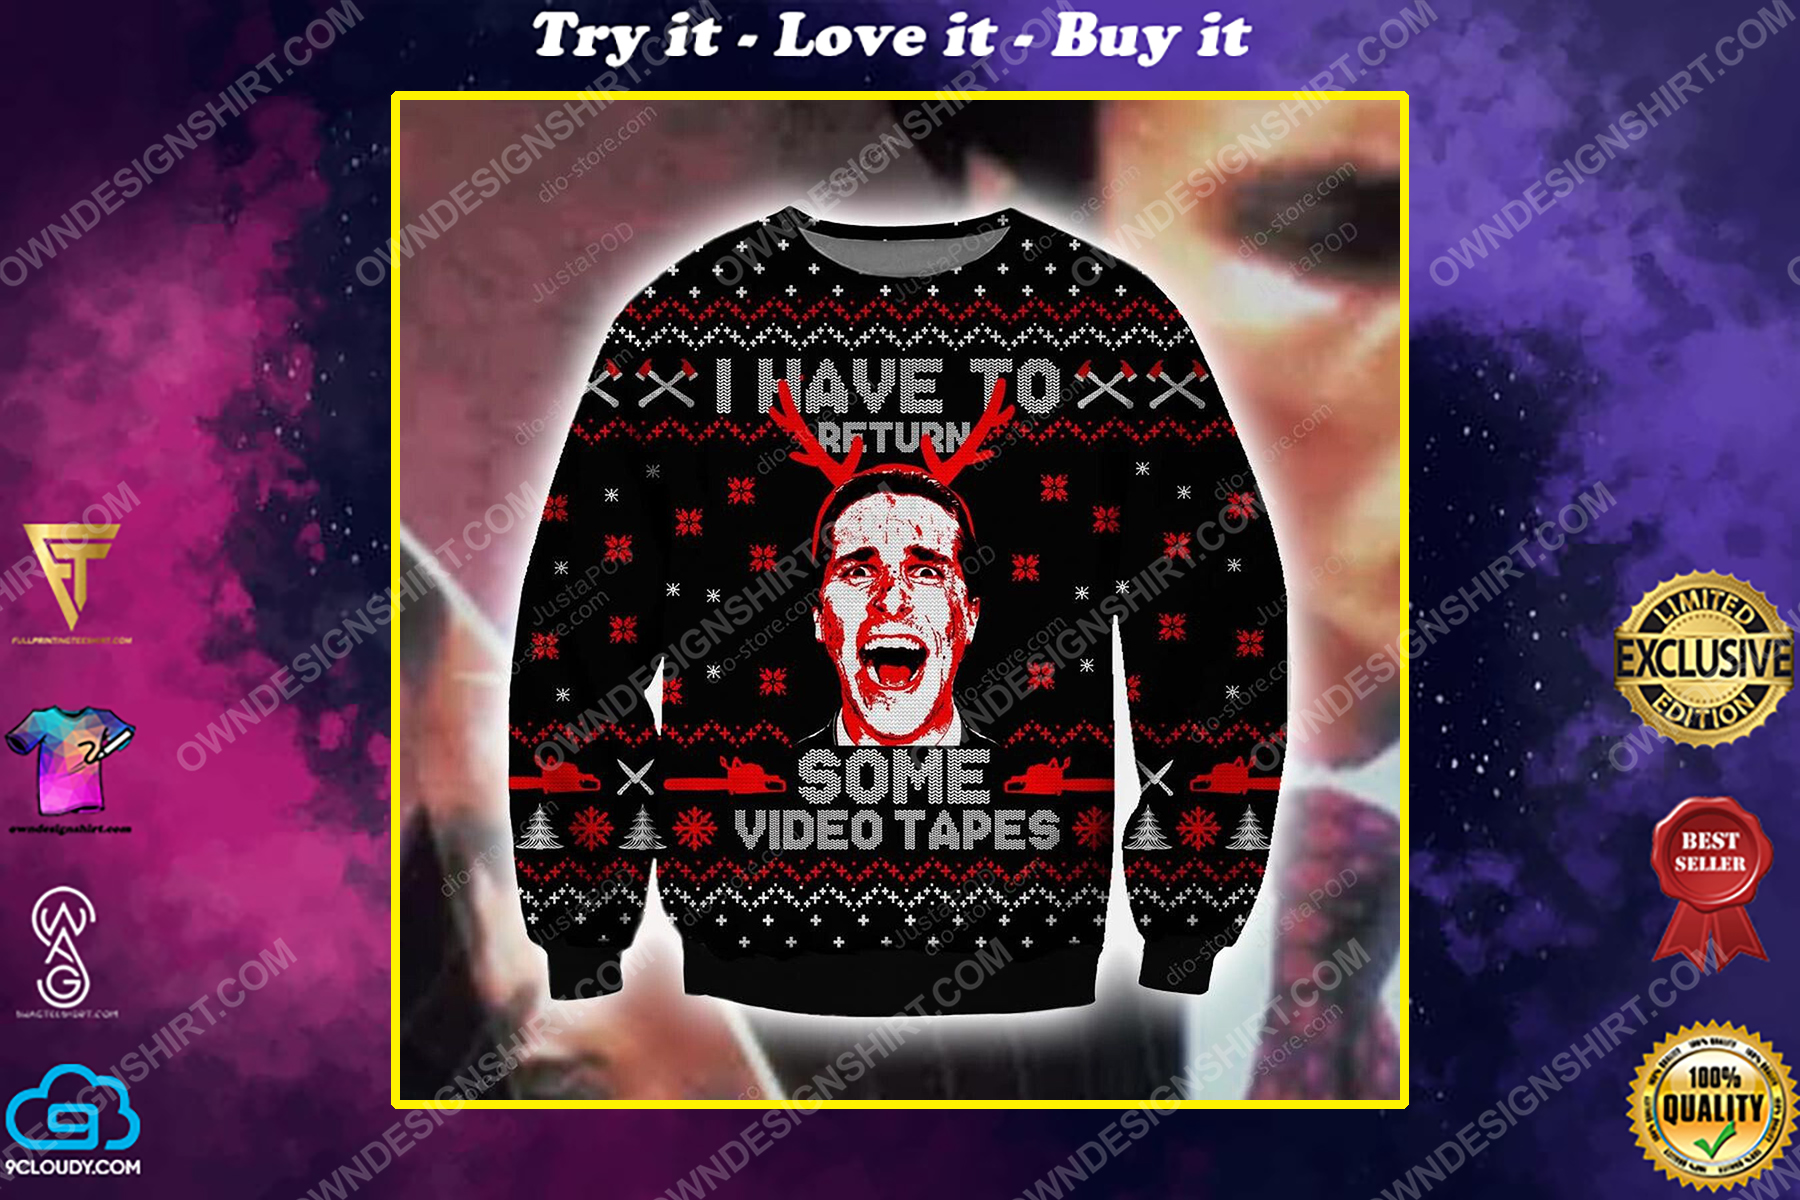 American psycho i have to return some videotapes ugly christmas sweater